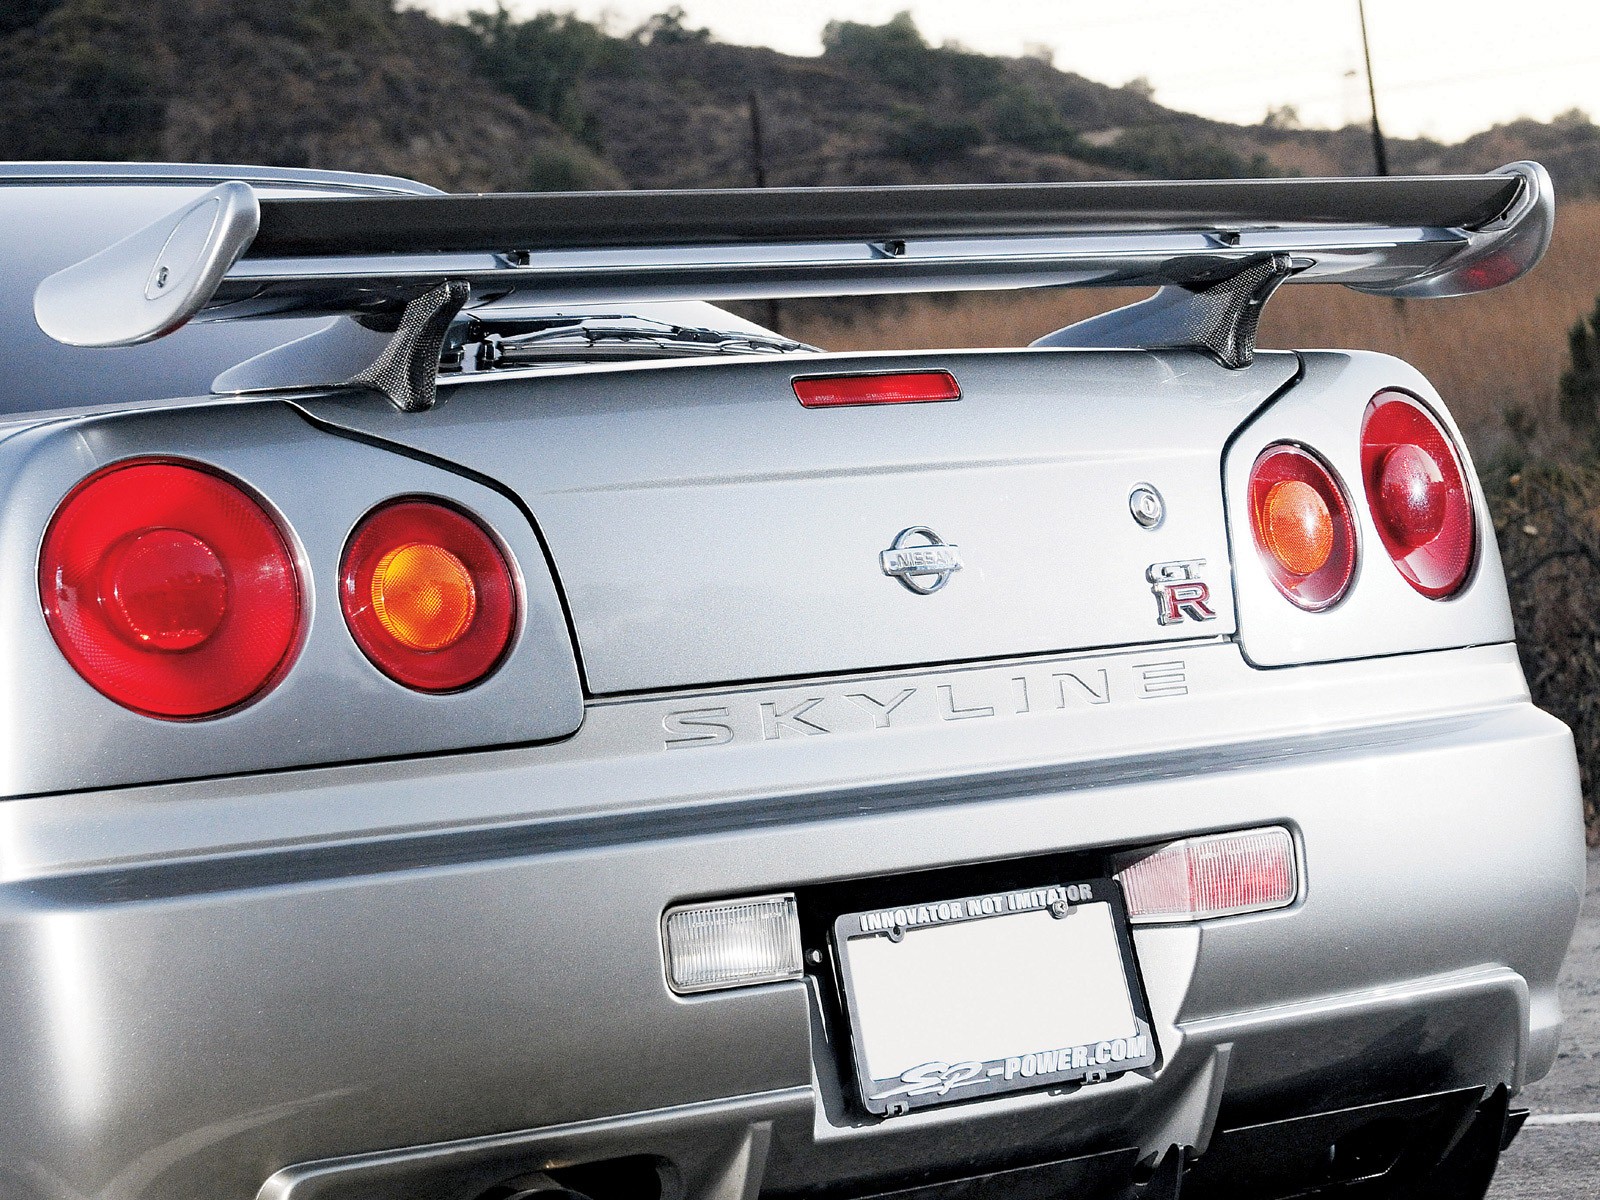 close up, Cars, Gray, Nissan, Backview, Vehicles, Nissan, Skyline, Nissan, Skyline, R34, Gt r, Nissan, Skyline, Gt r Wallpaper